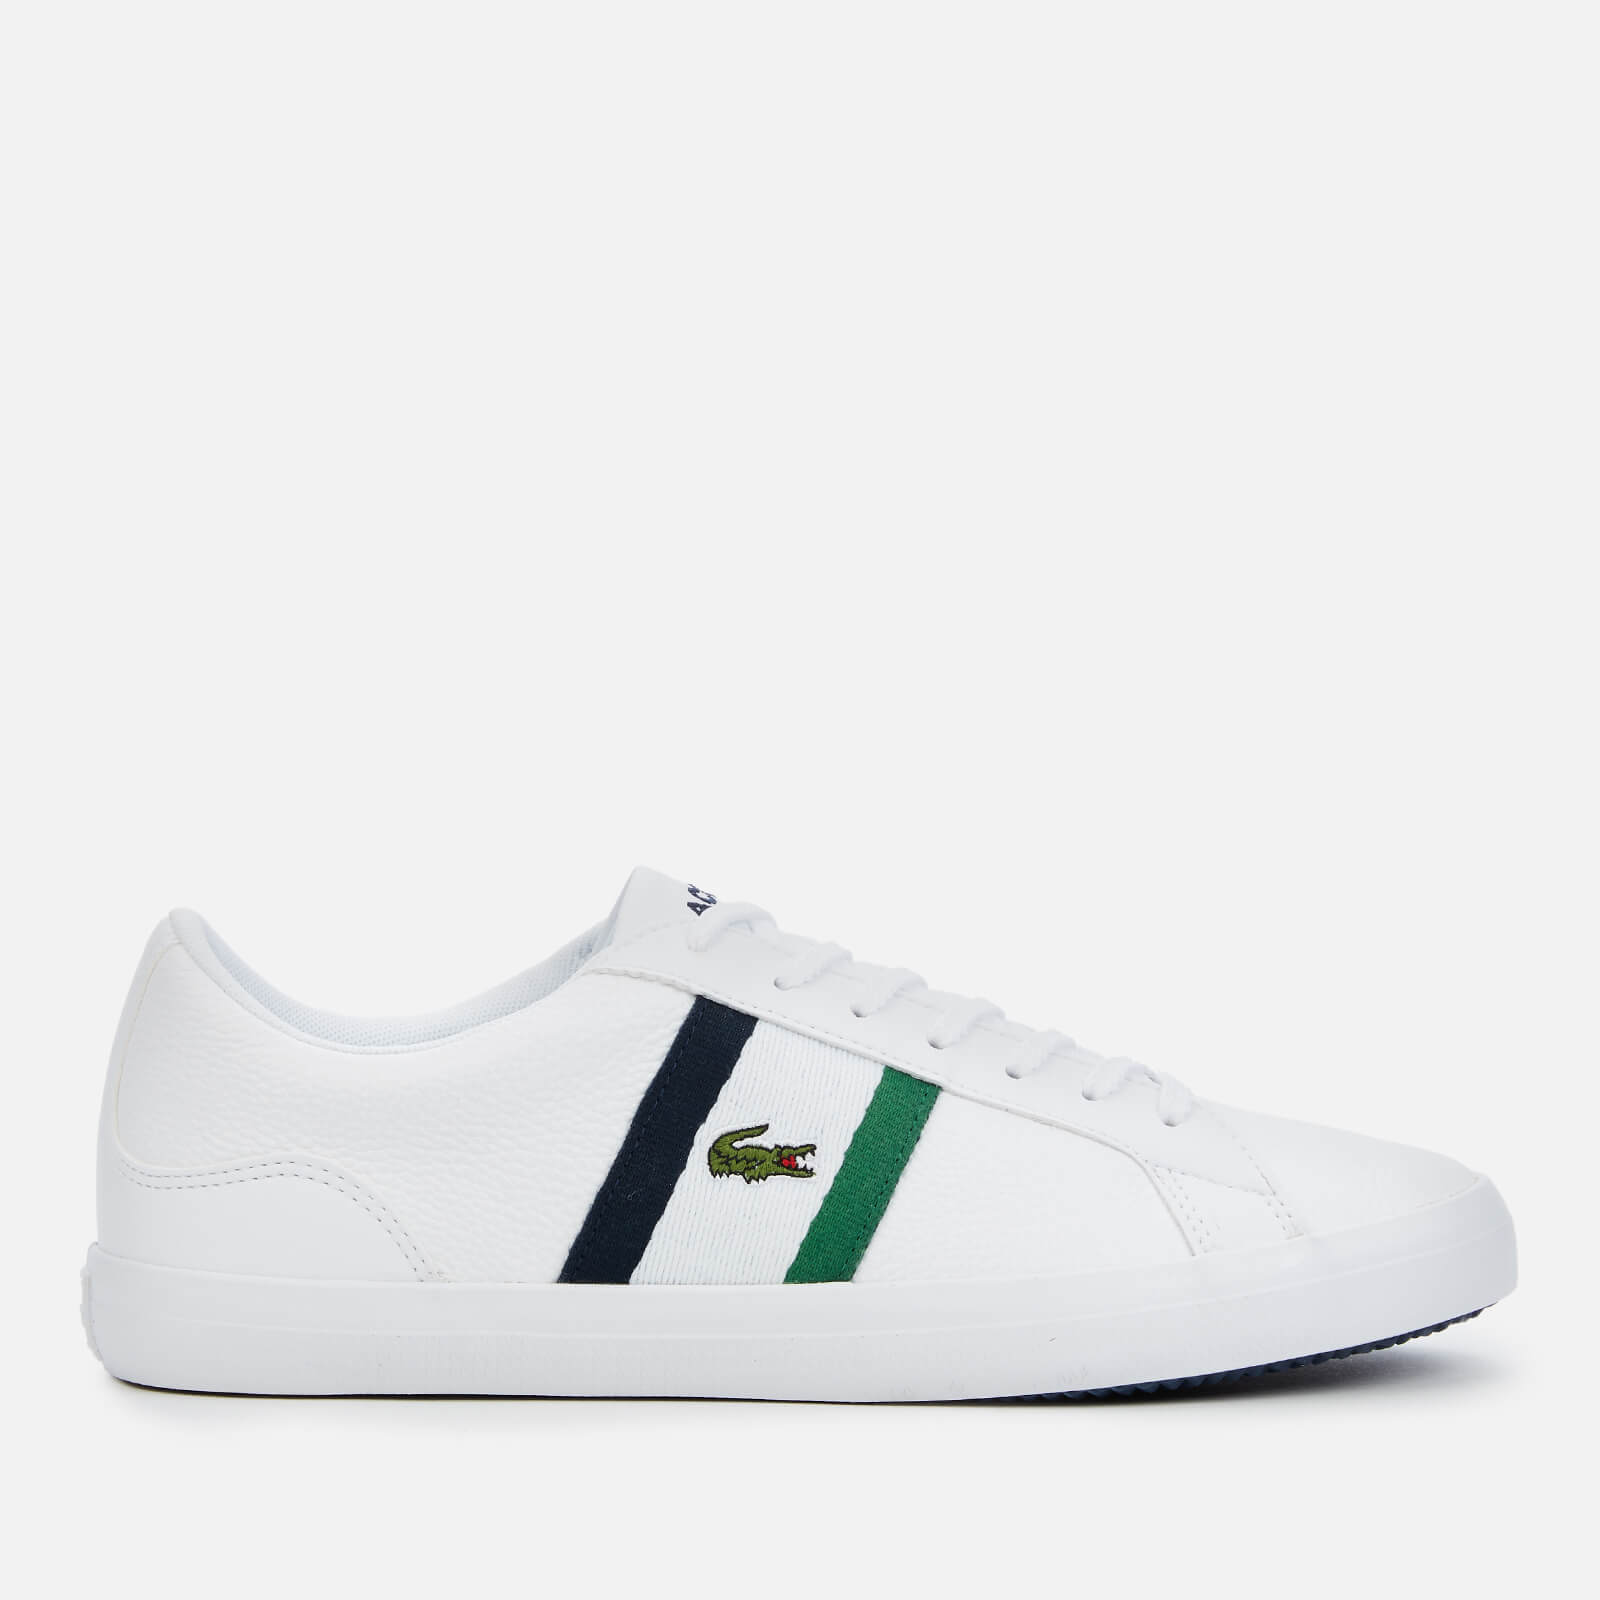 Lacoste Men's Lerond 119 3 Leather Low Top Trainers - White/Navy - UK 8